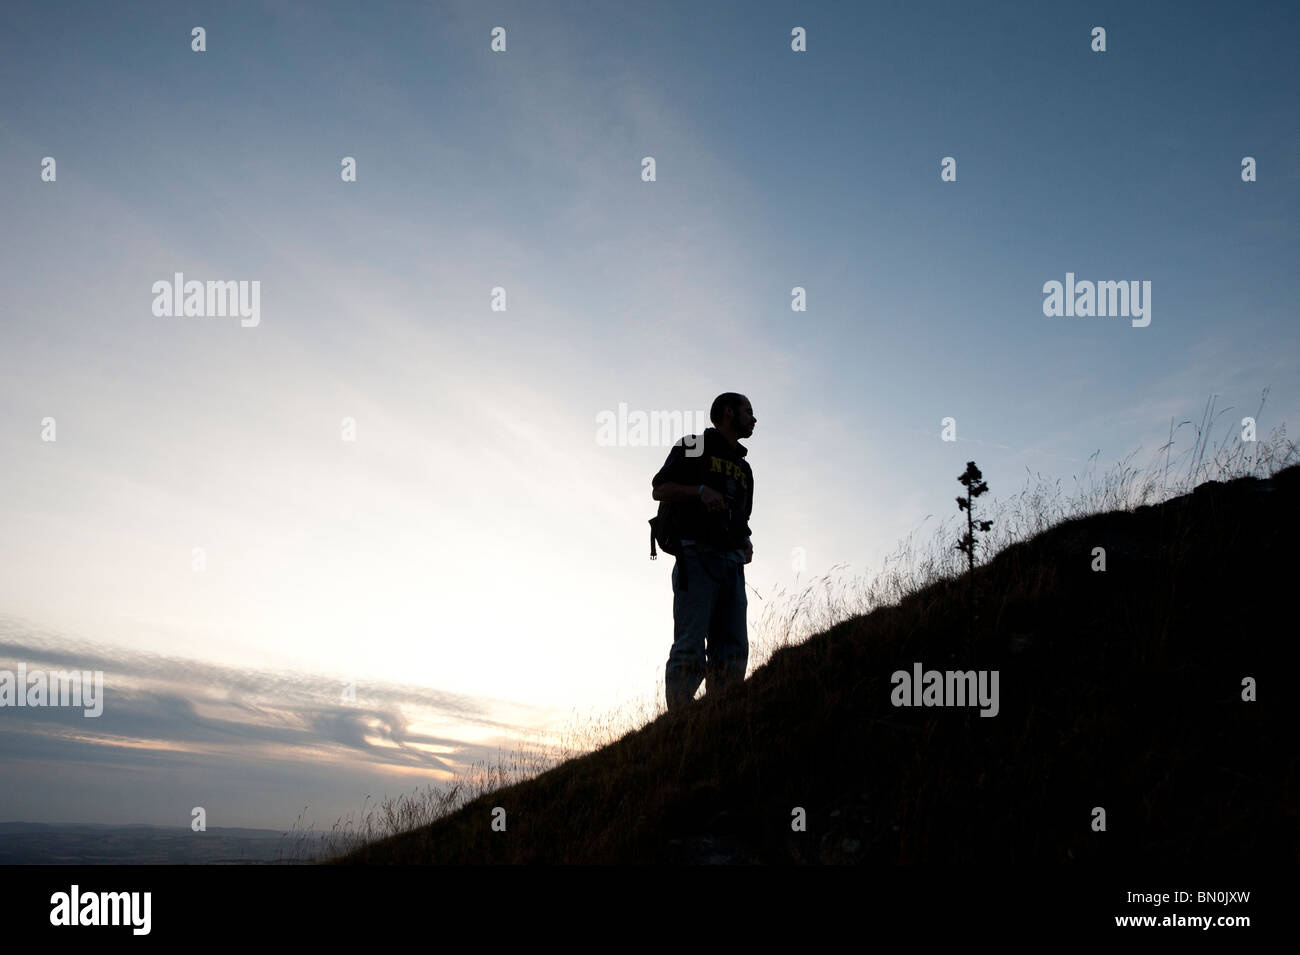 Silhouette of man stood on the side of a hill enjoying the view. Stock Photo